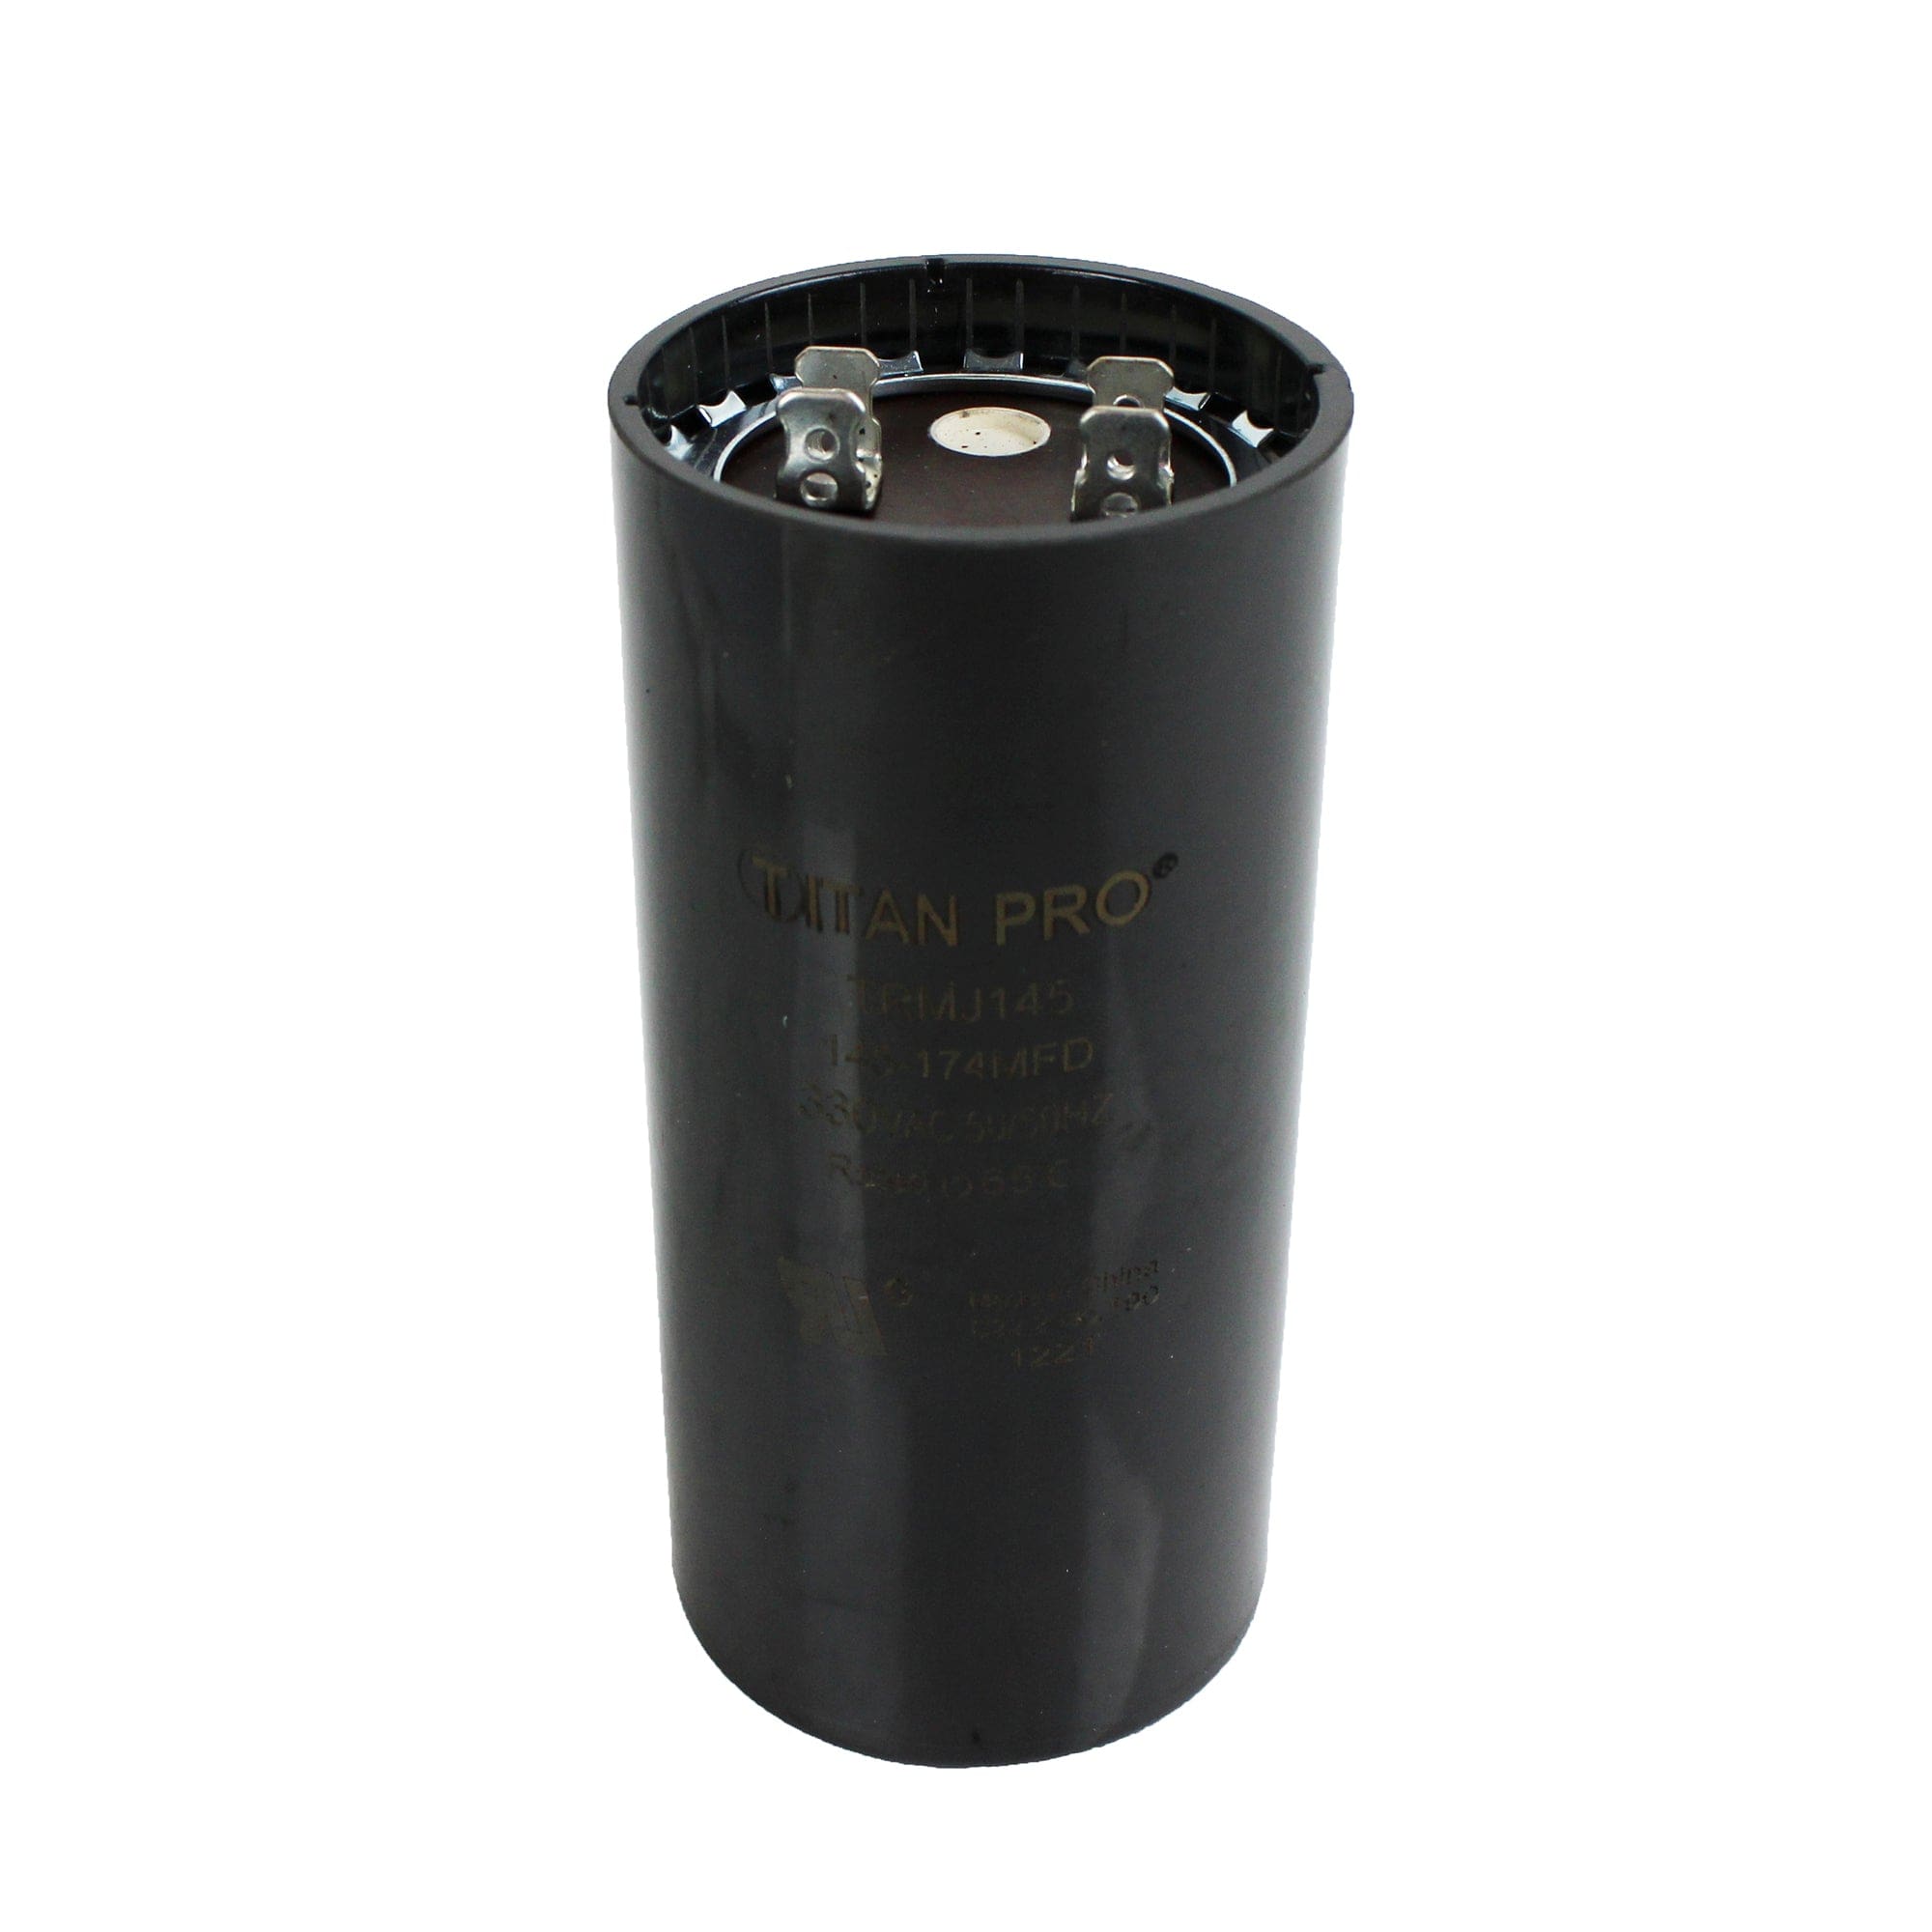 Packard TRMJ145 Start Capacitor 145-174 MFD 330 Volt Replaces PRMJ145